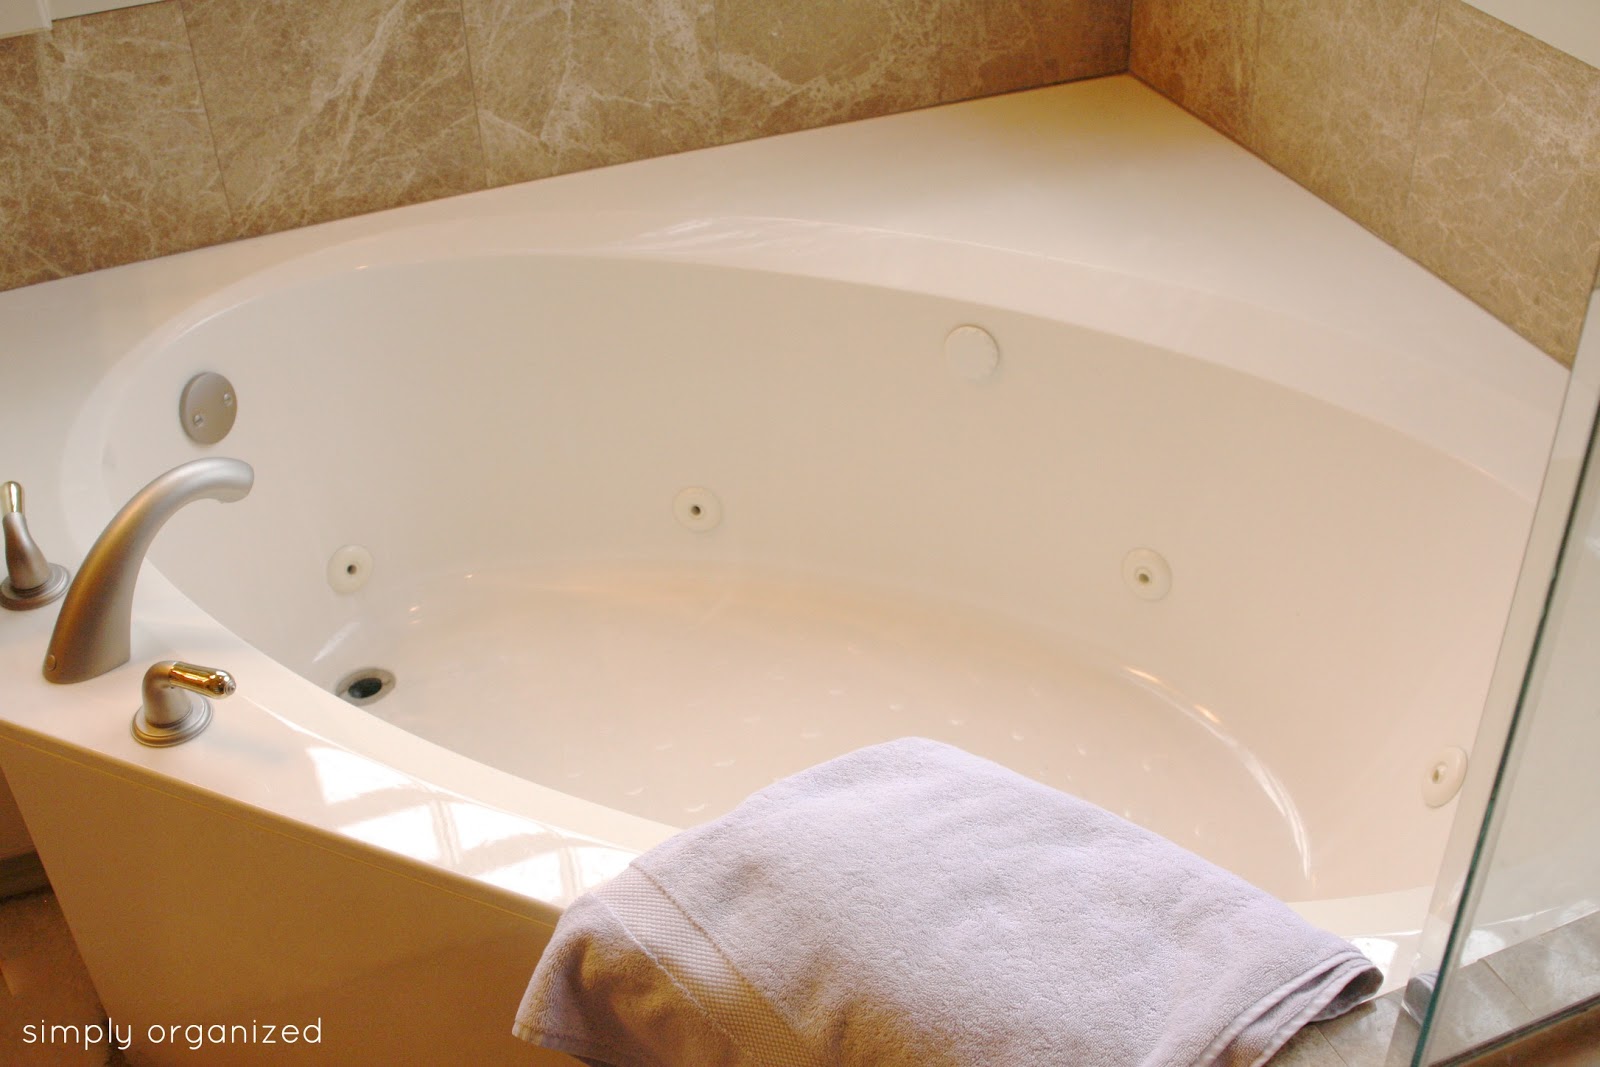 How To Clean Whirlpool Tub Jets, Jacuzzi Jets For Bathtub